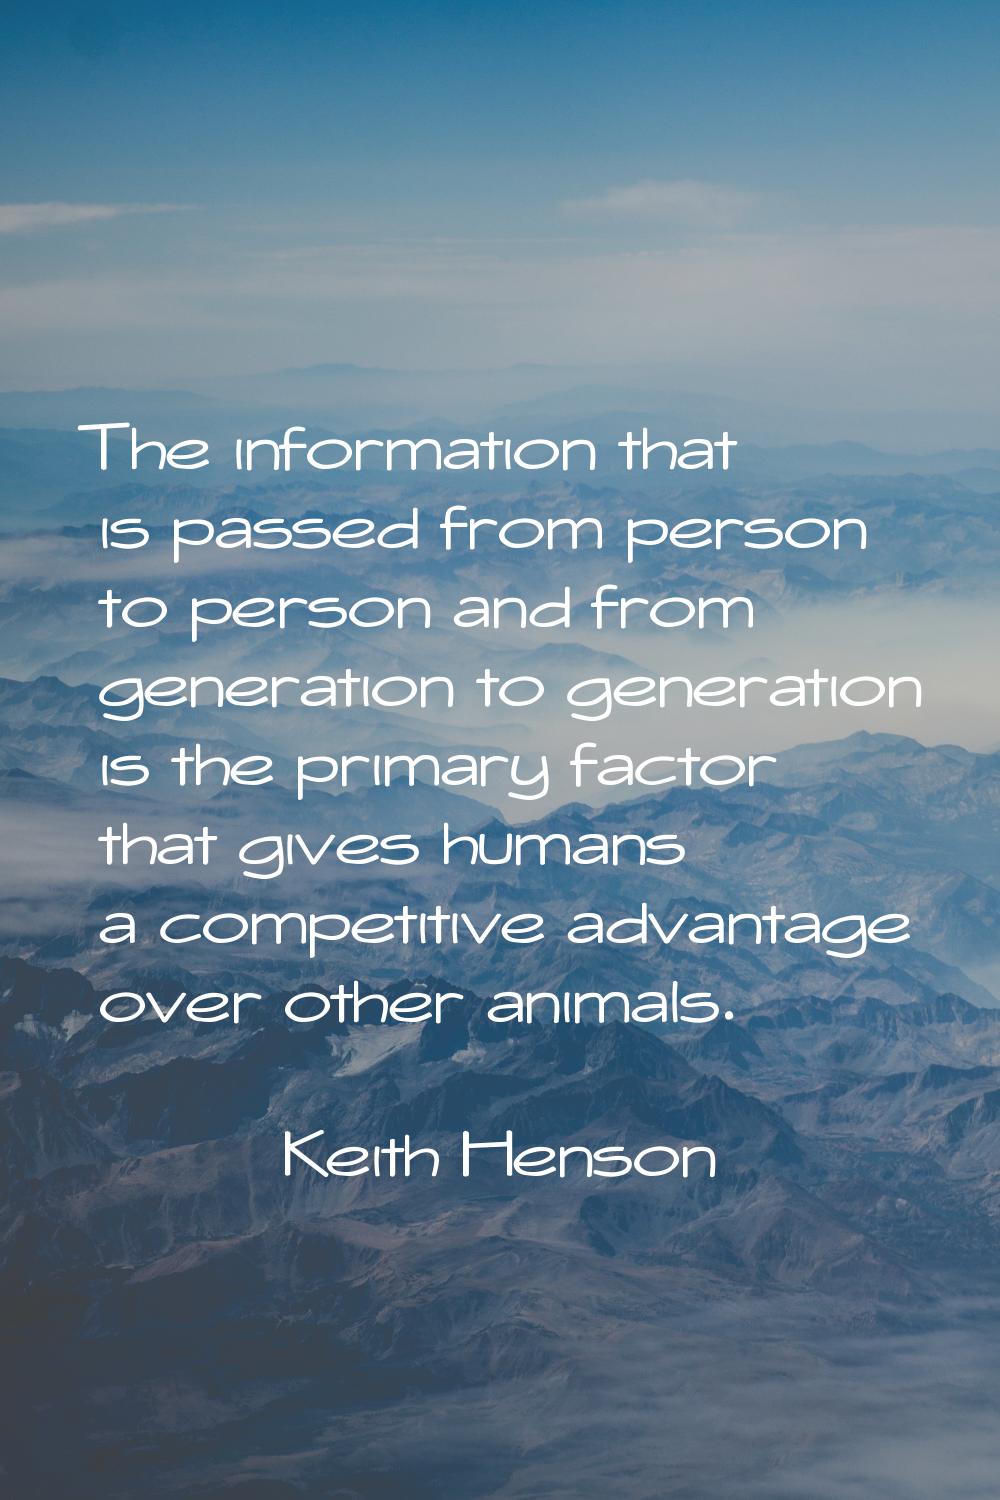 The information that is passed from person to person and from generation to generation is the prima